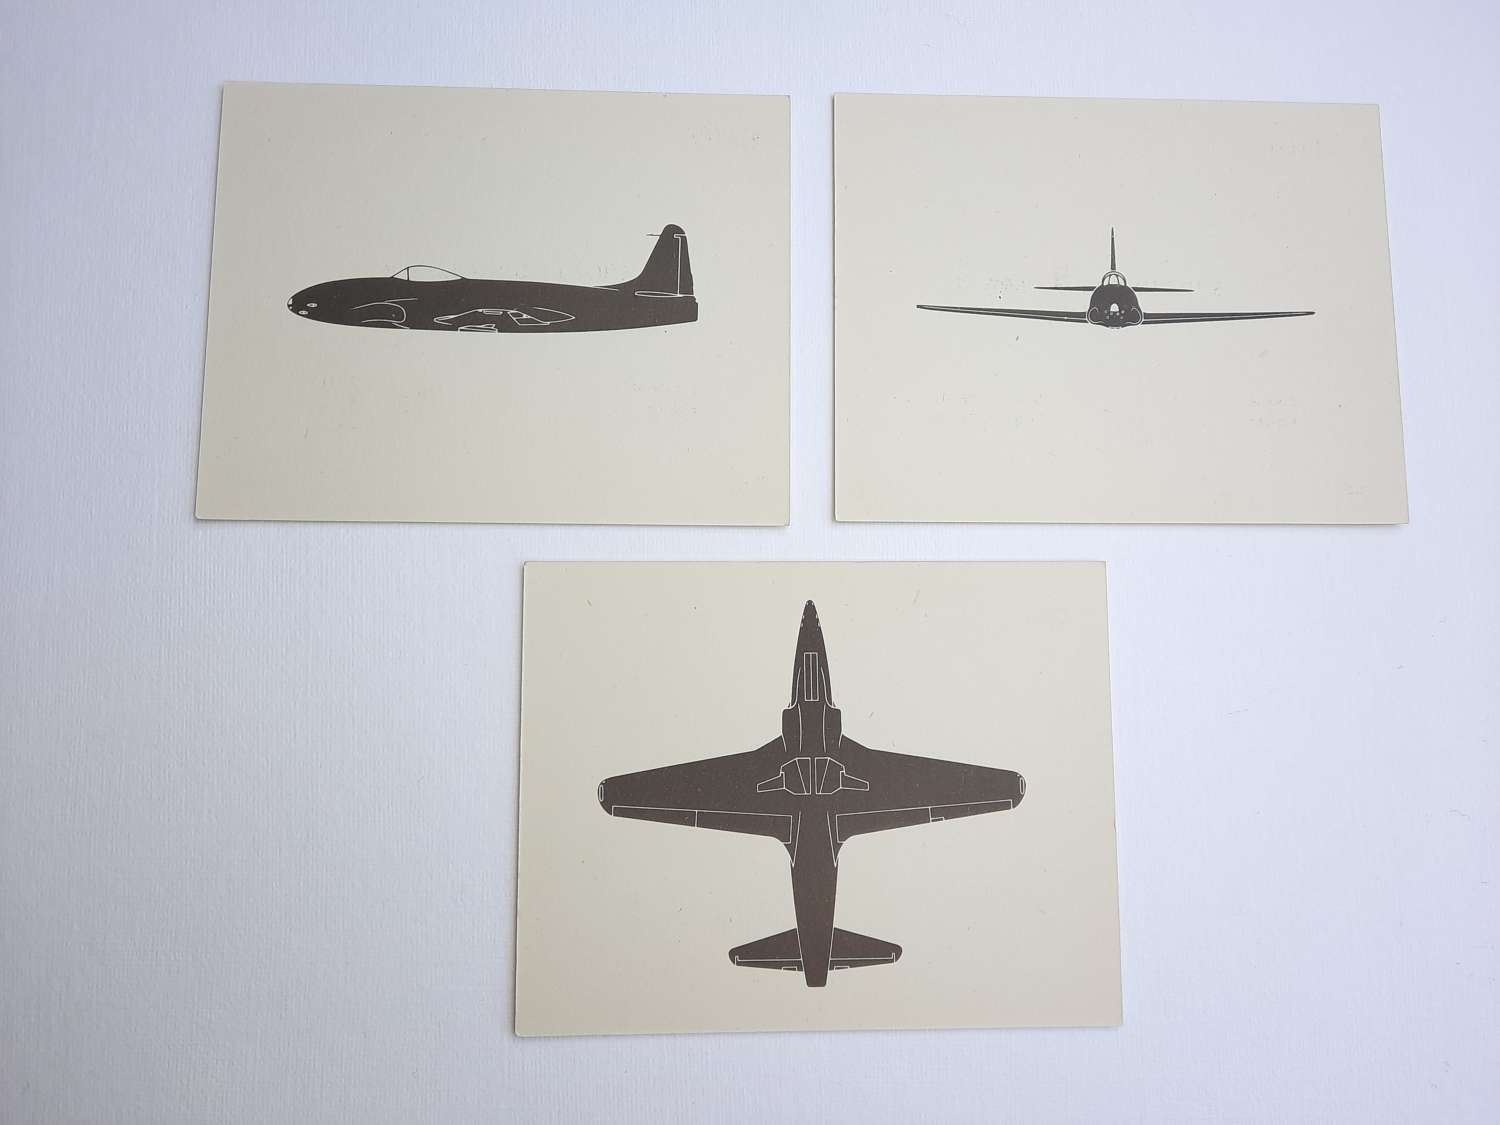 P-80 Shooting Star Aircraft Recognition Cards